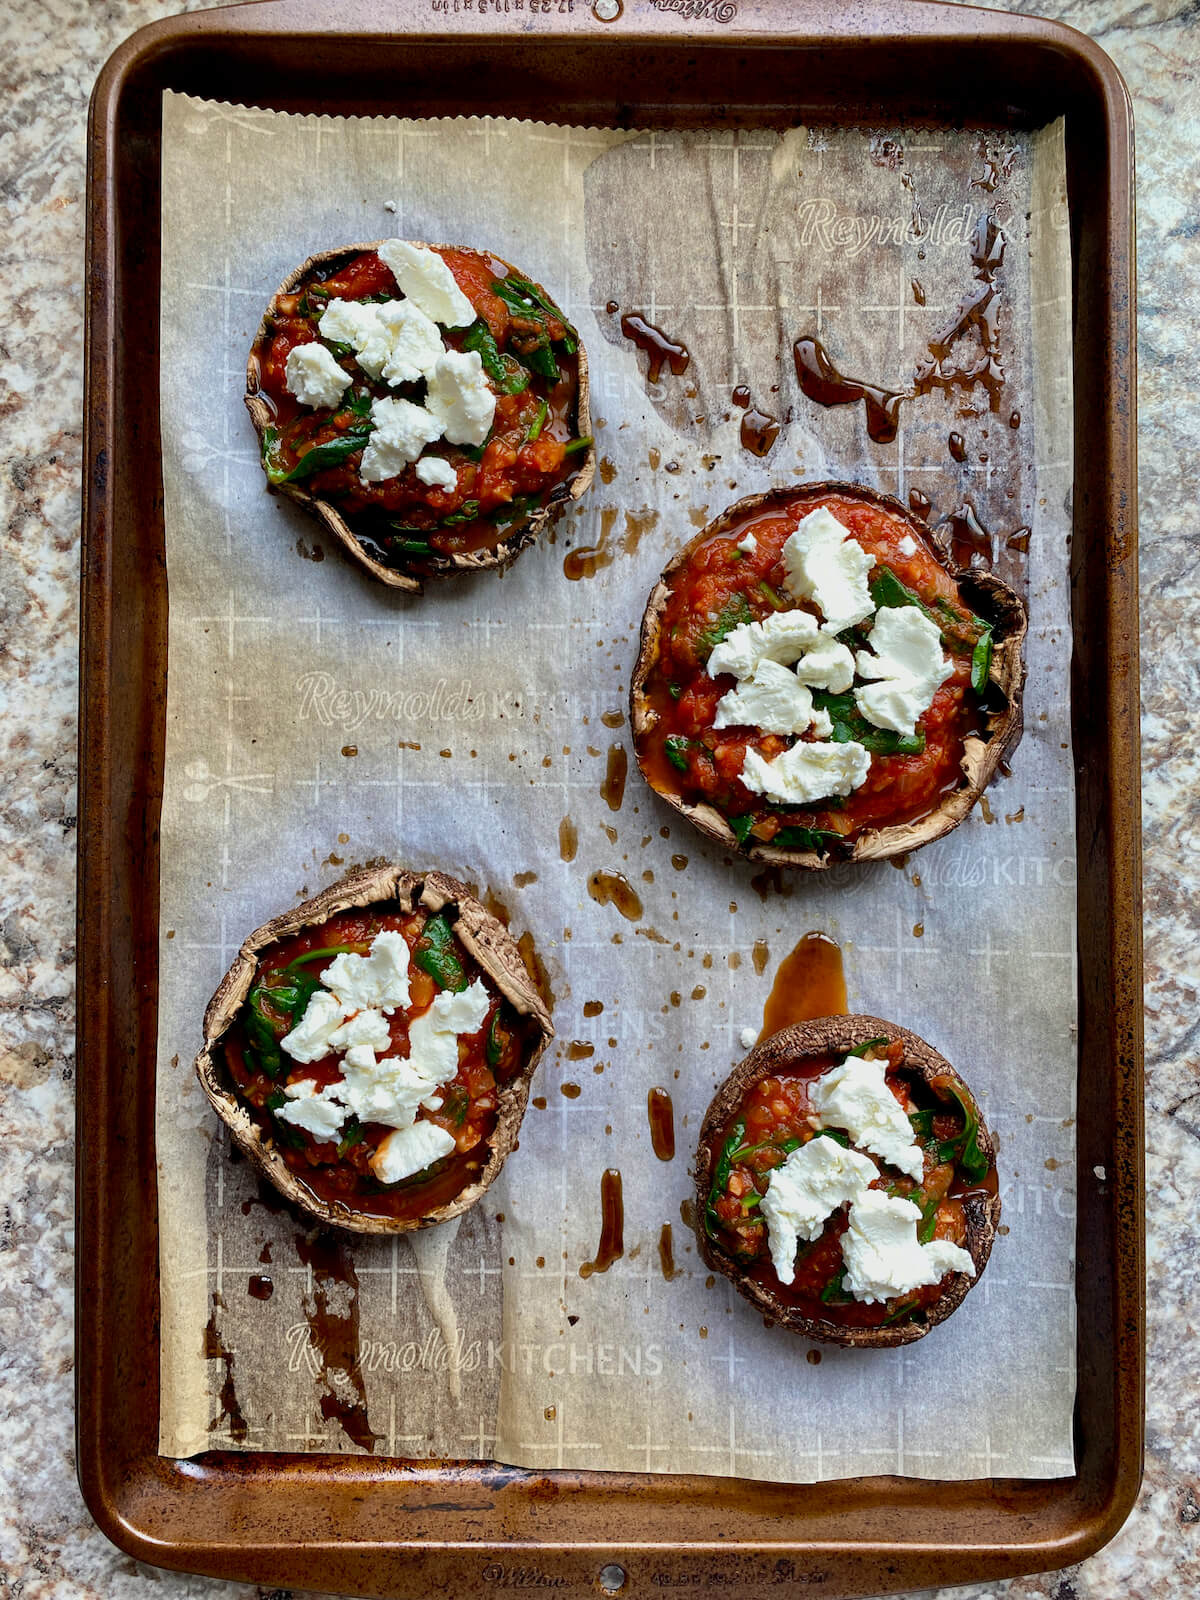 Roasted portobello mushrooms caps topped with spinach tomato sauce and goat cheese.